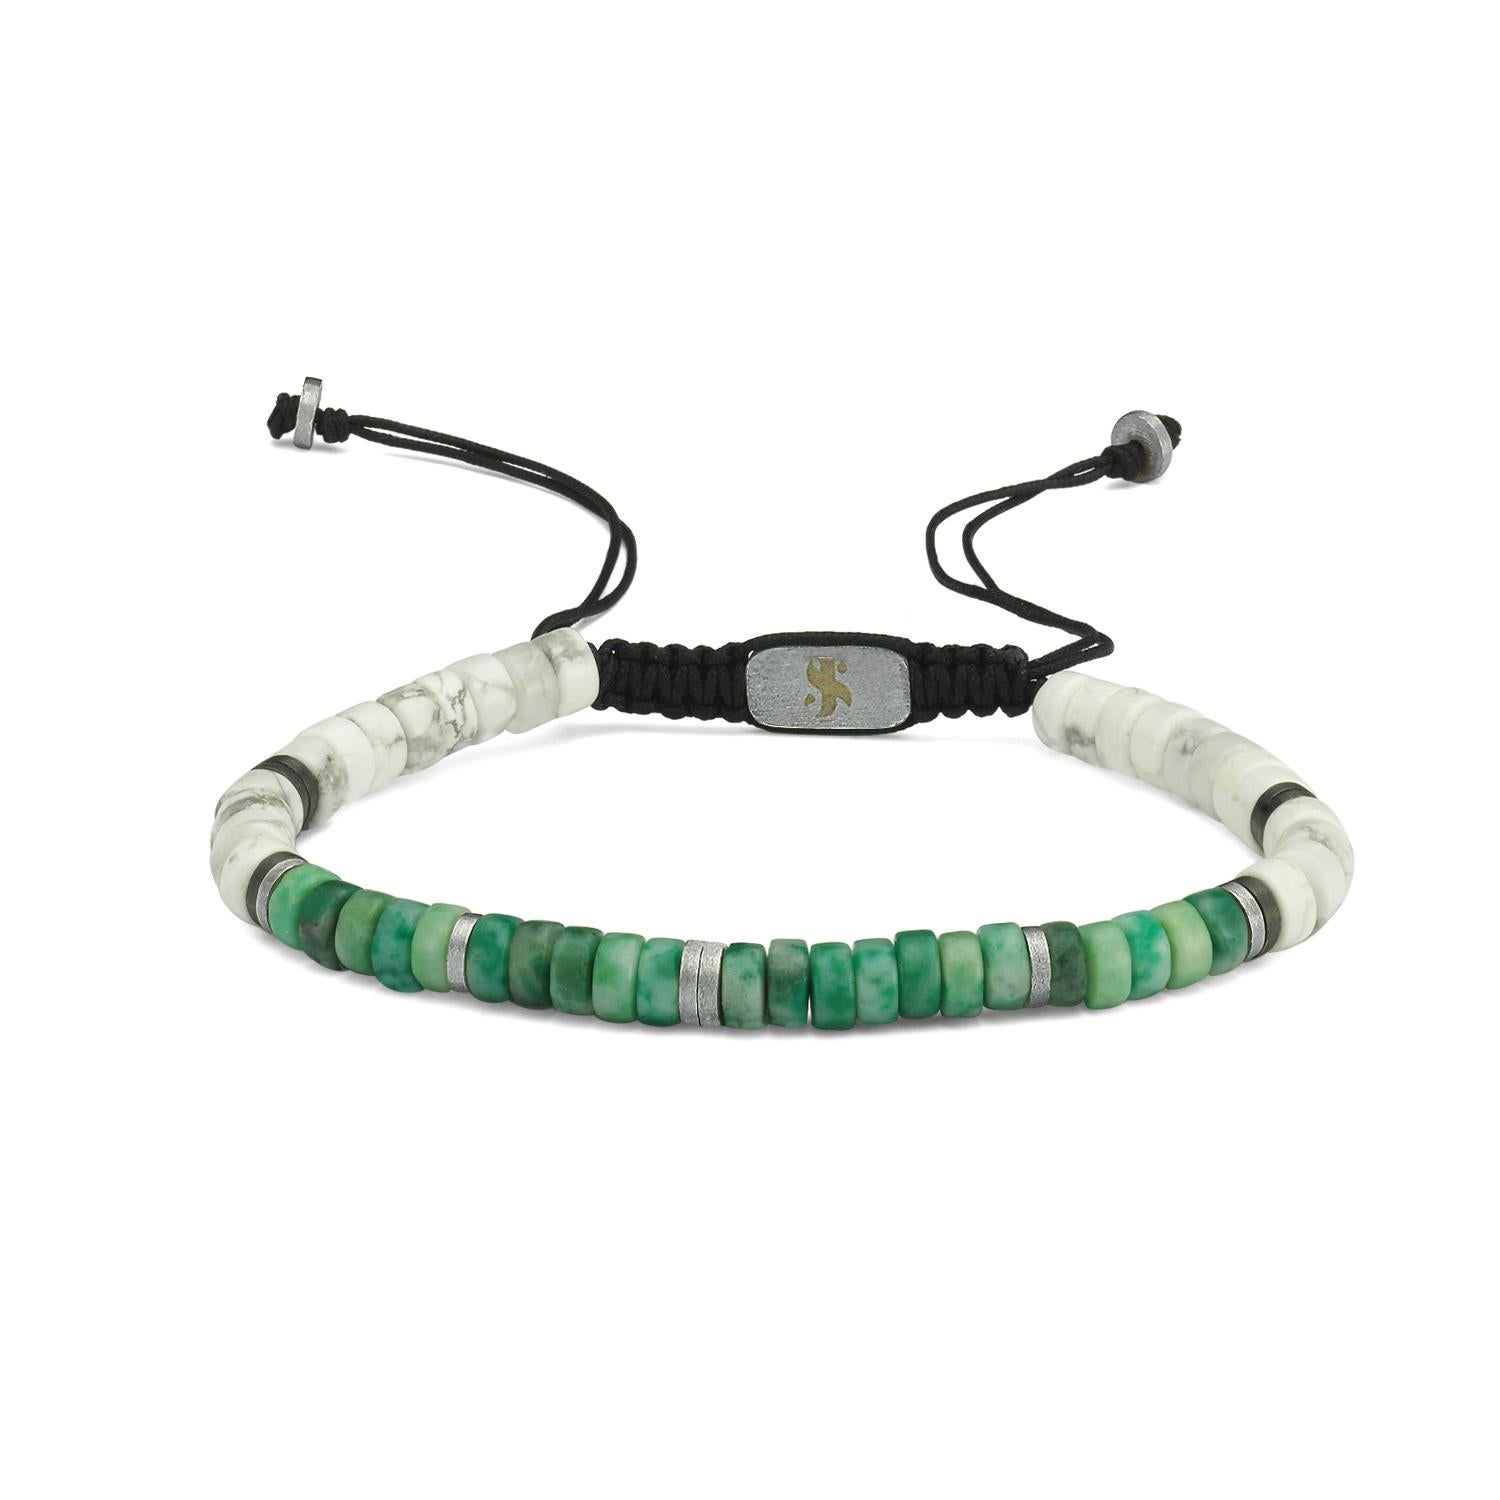 Stoorworm bracelet- lolite & jadeite  by Selda Jewellery

Additional Information:-
Collection: Men's Luxury Bracelets

The mix of iolite&jade stones is combined with sterling silver Charms to create a sporty and stylish bracelet.